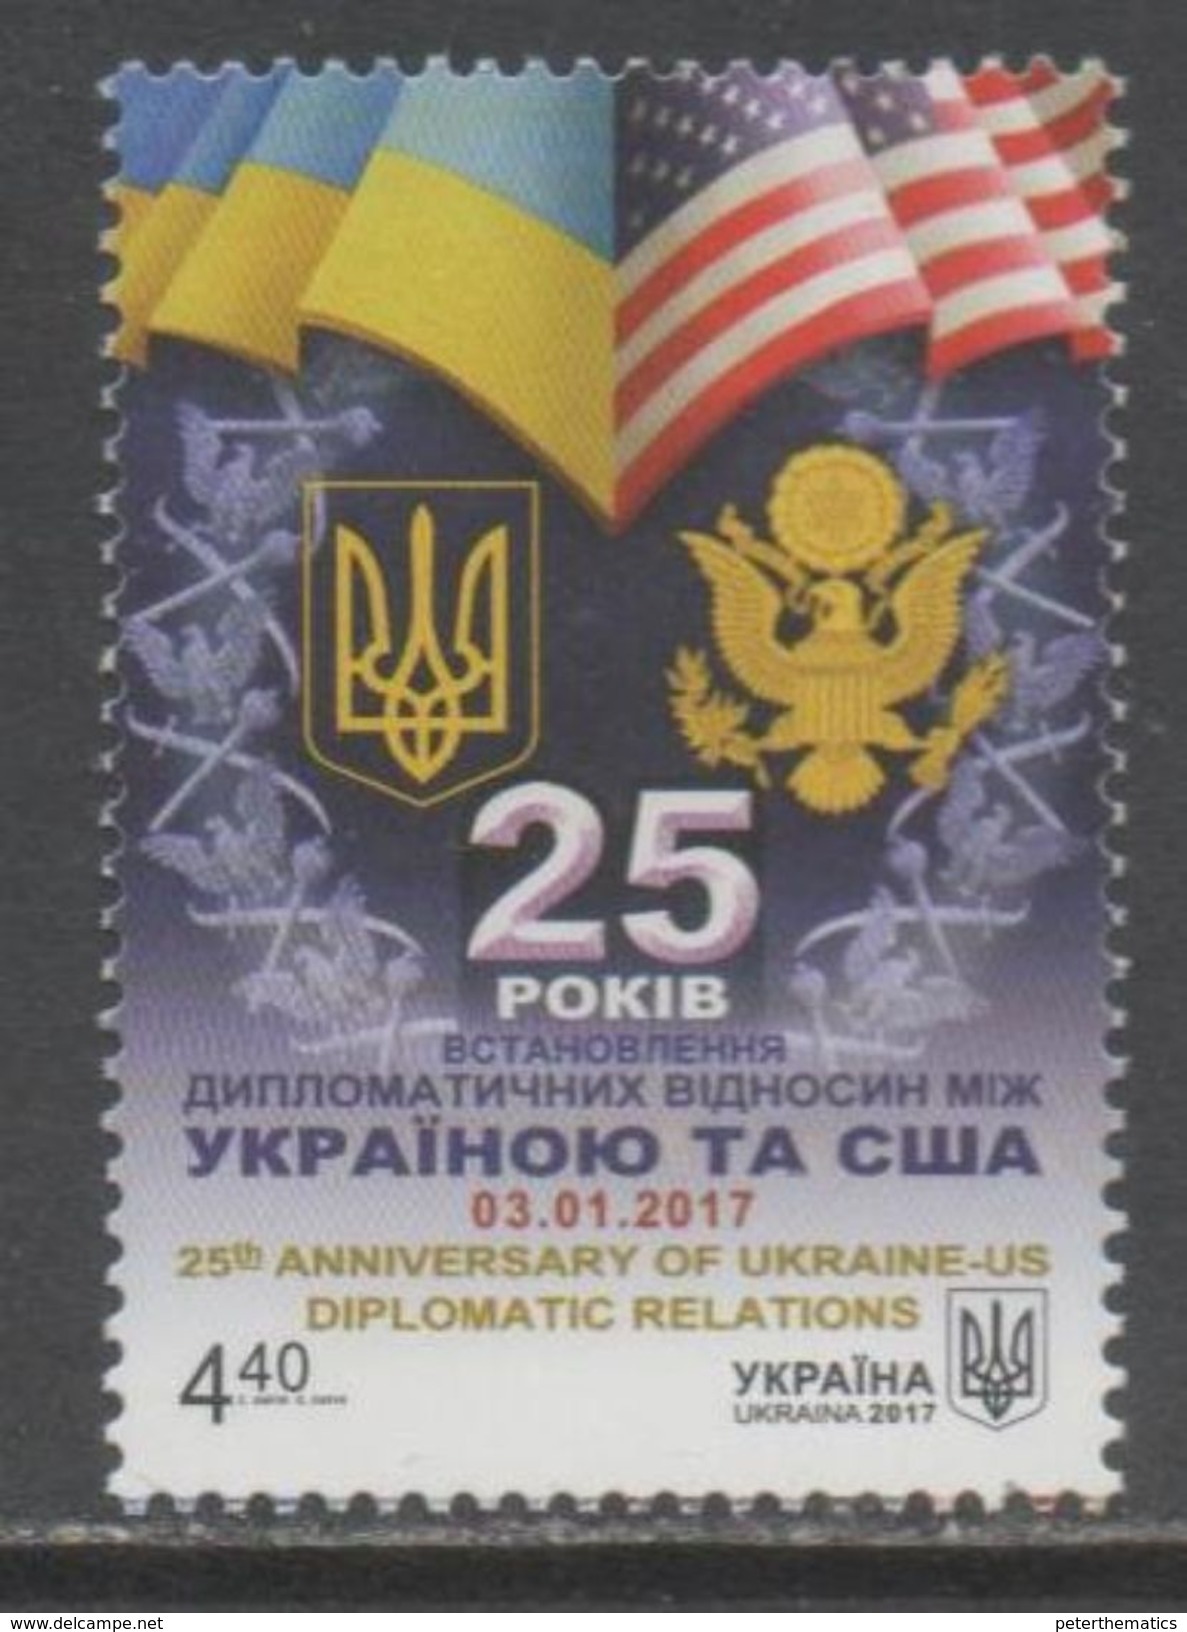 UKRAINE, 2017, MNH, 25TH ANNIVERSARY OF UKRAINE-US DIPLOMATIC RELATIONS, FLAGS, OFFICIAL SEALS, EAGLES, 1v - Stamps